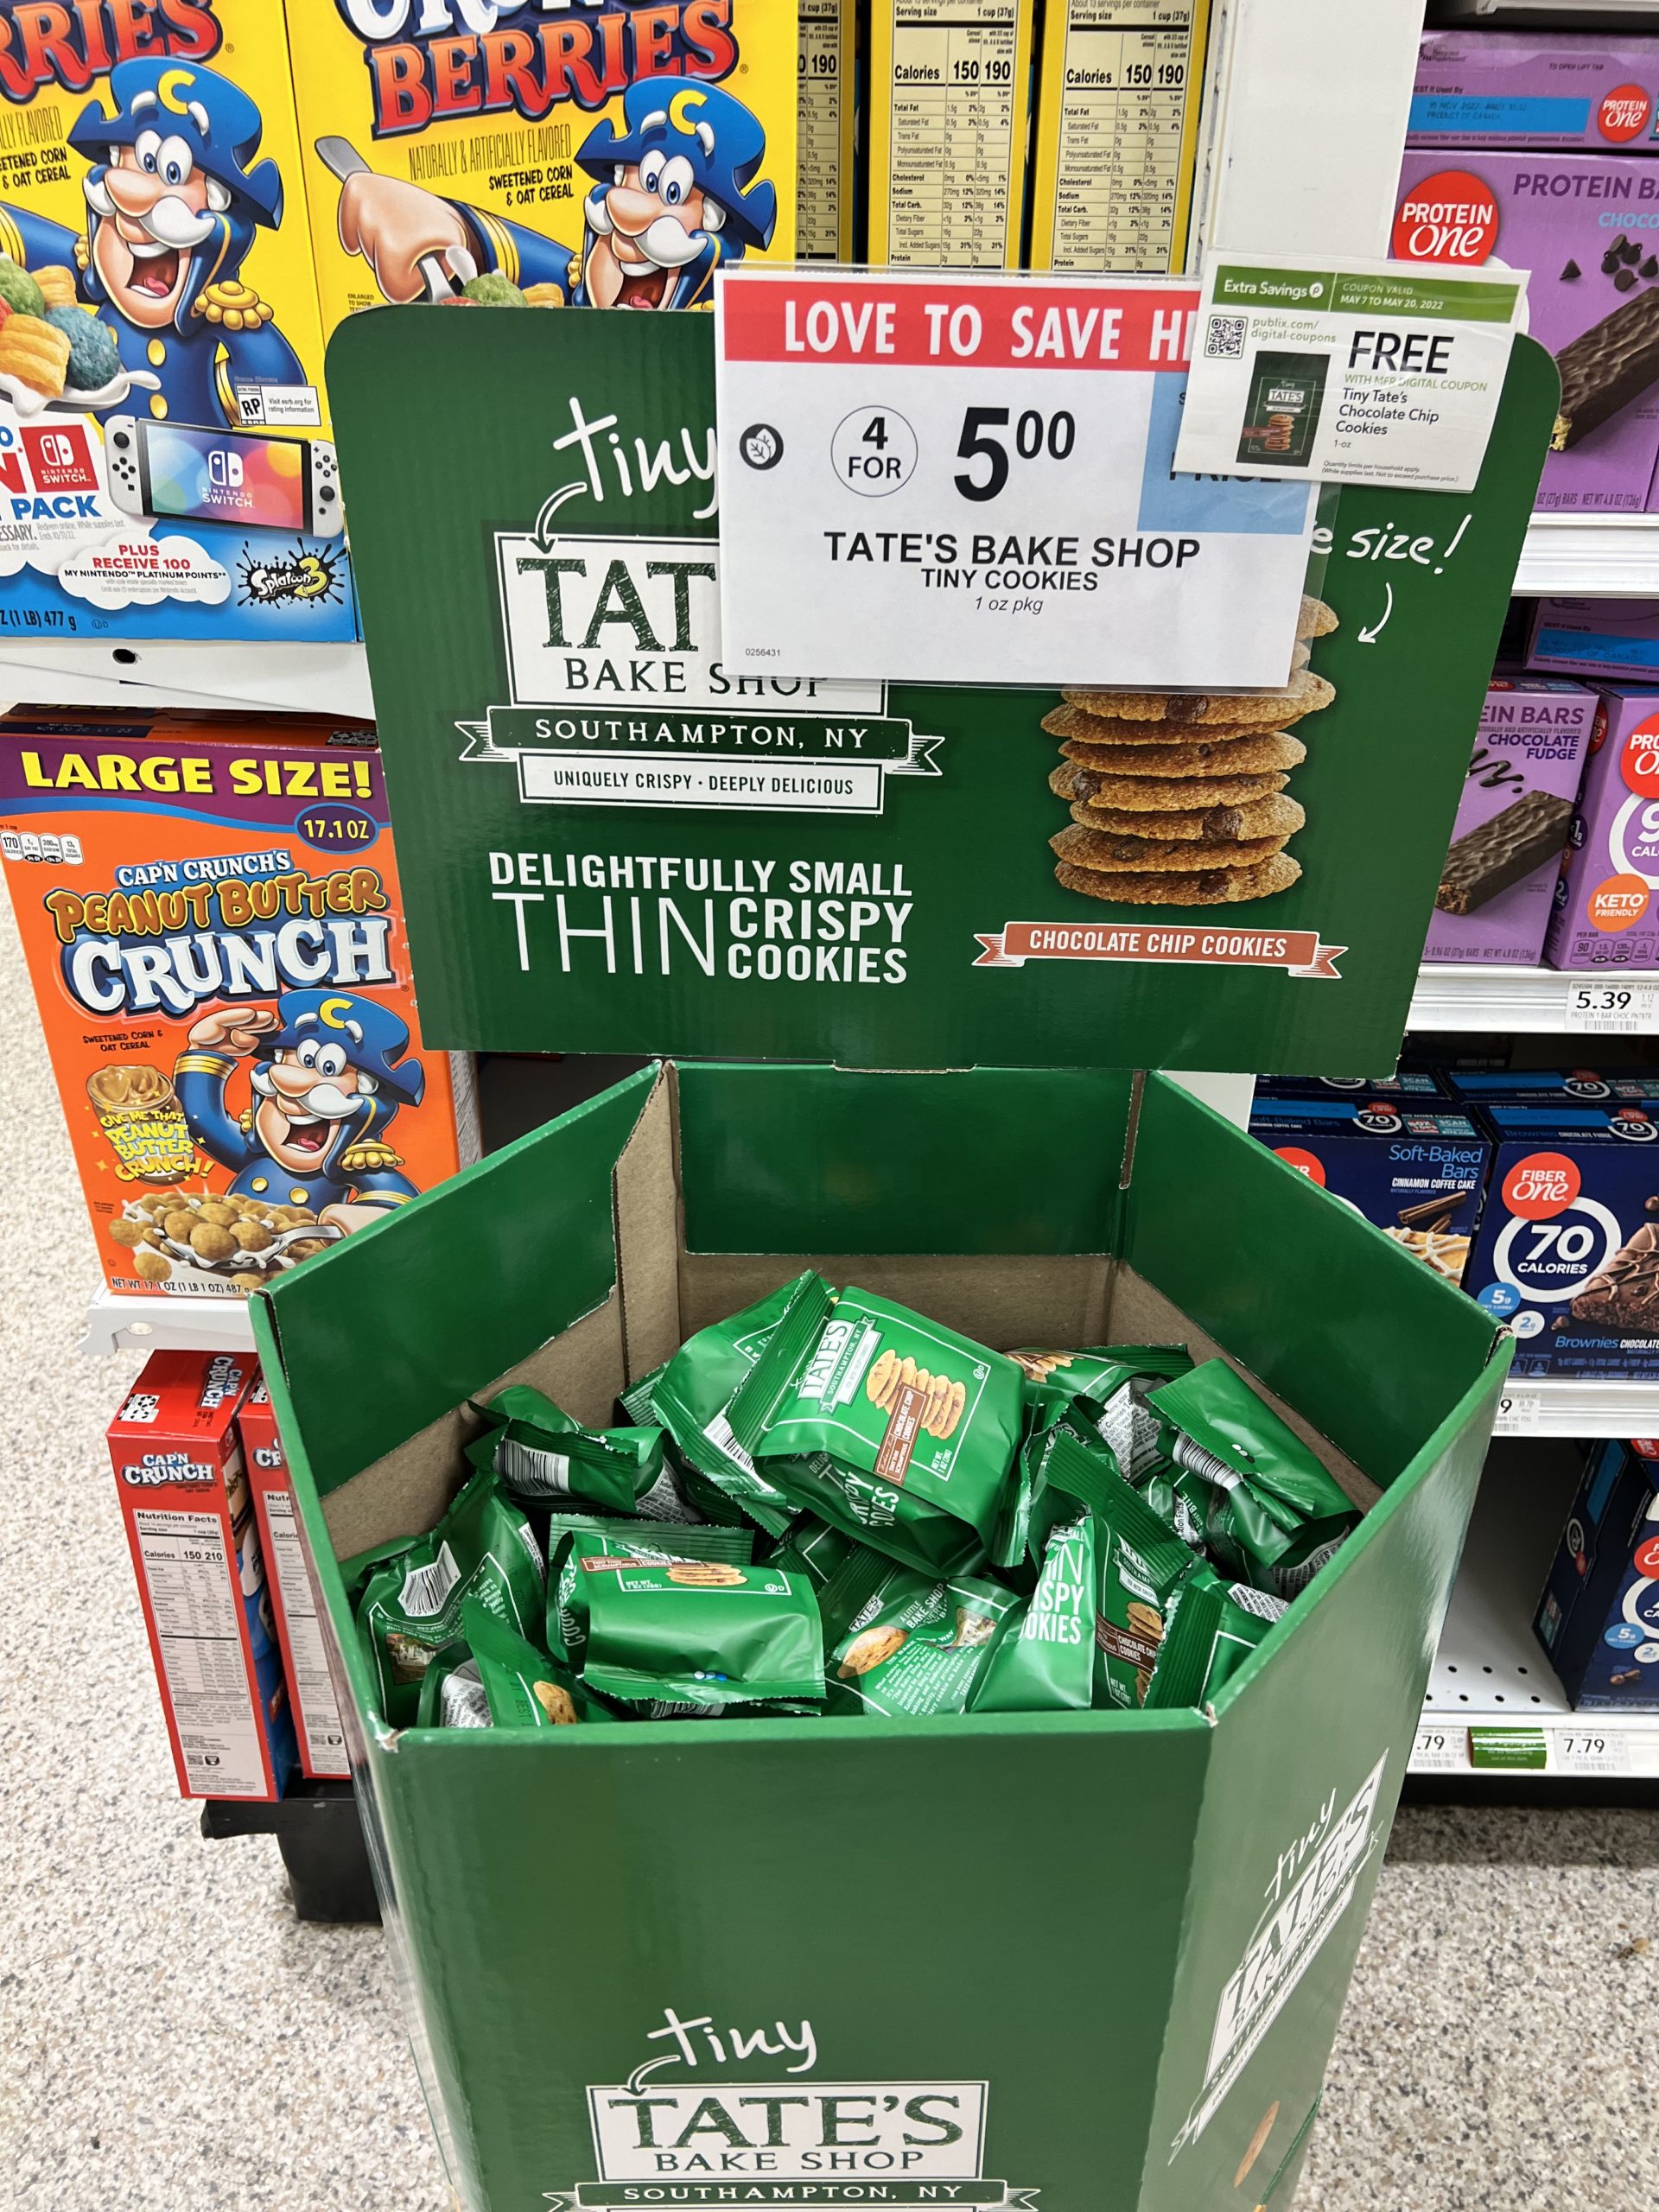 Possible Free Tiny Tate’s Chocolate Chip Cookies At Publix on I Heart Publix